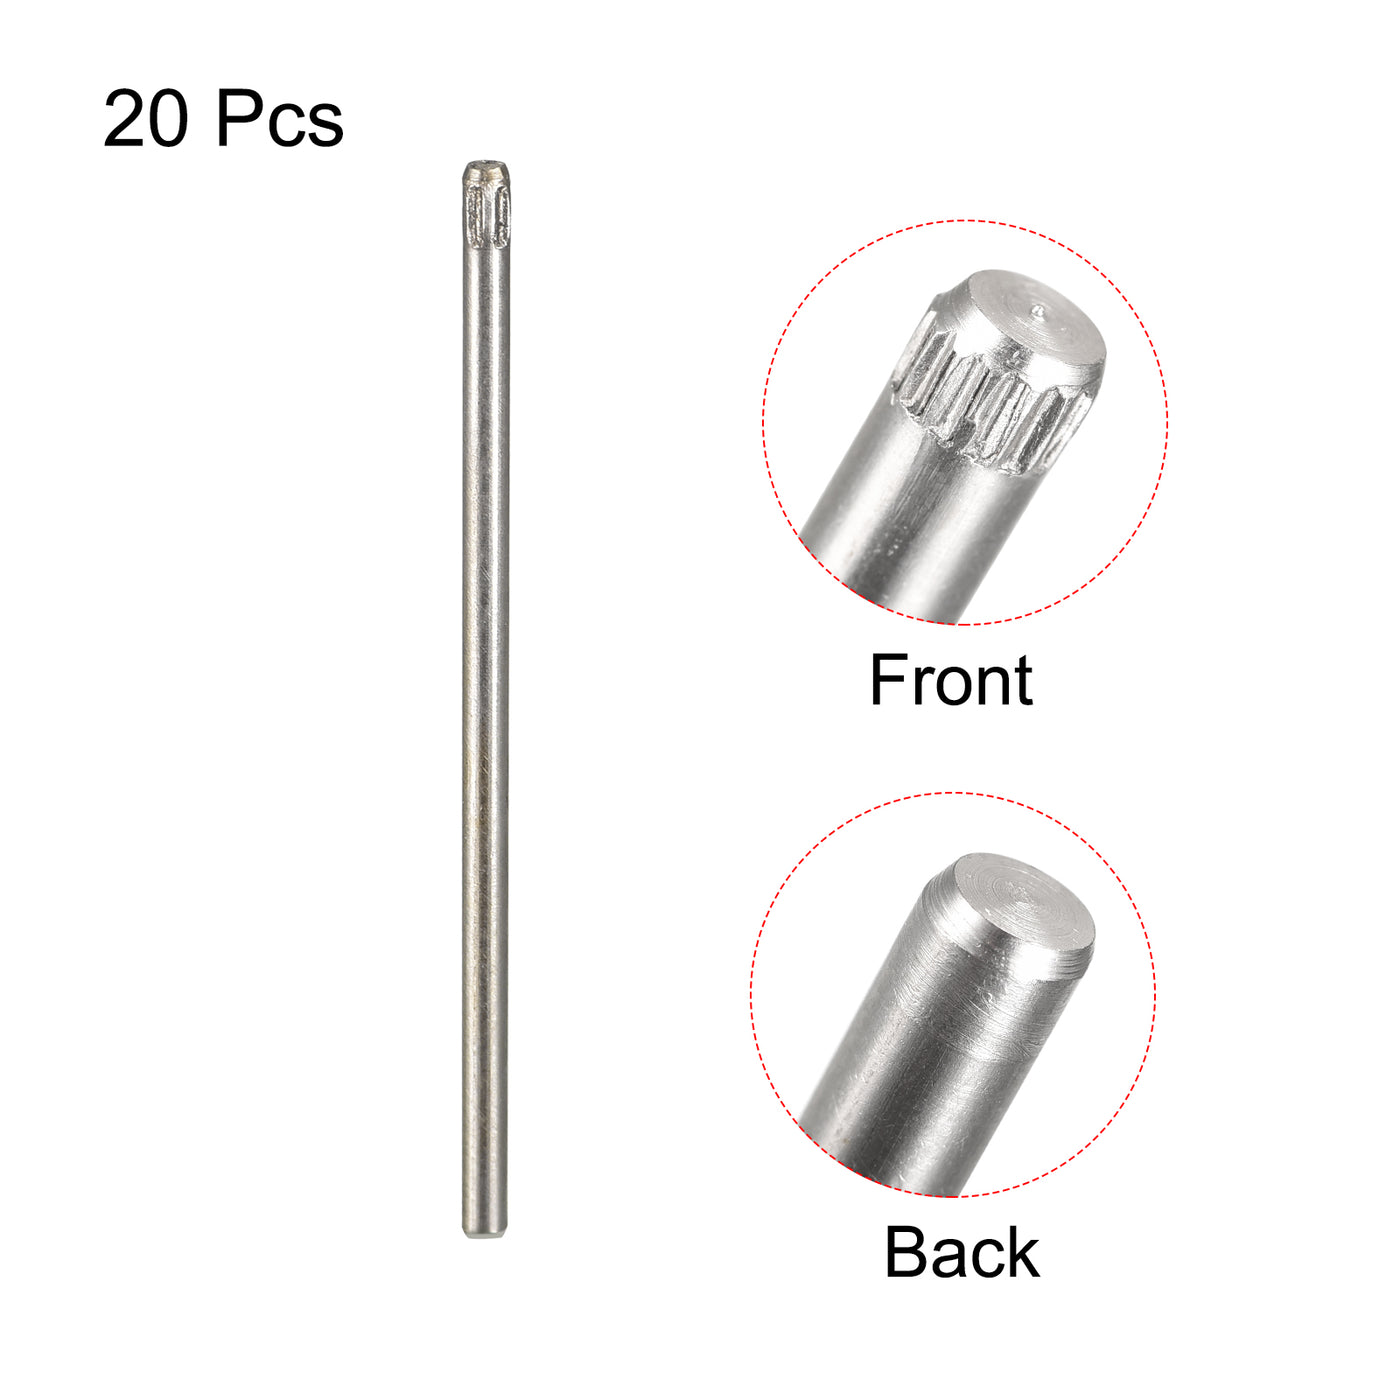 uxcell Uxcell 1.5x35mm 304 Stainless Steel Dowel Pins, 20Pcs Knurled Head Flat End Dowel Pin